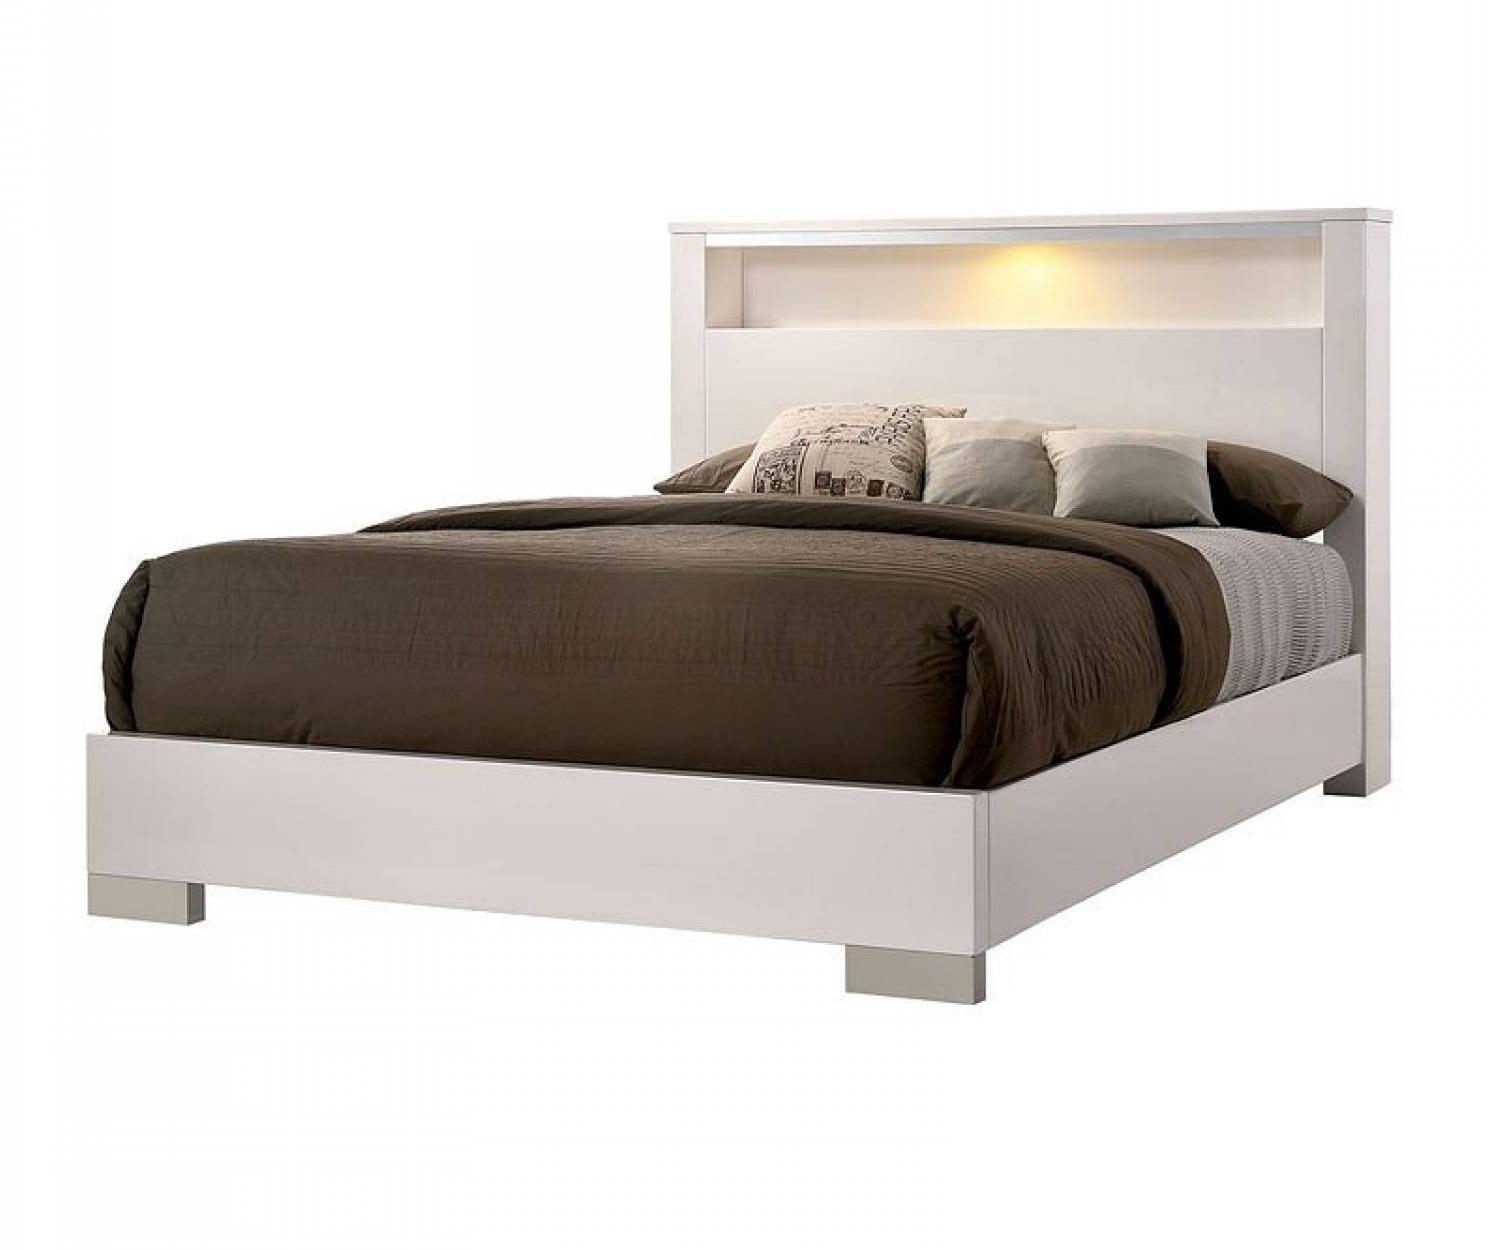 Contemporary Platform Bed CM7049WH-CK Carlie CM7049WH-CK in White 